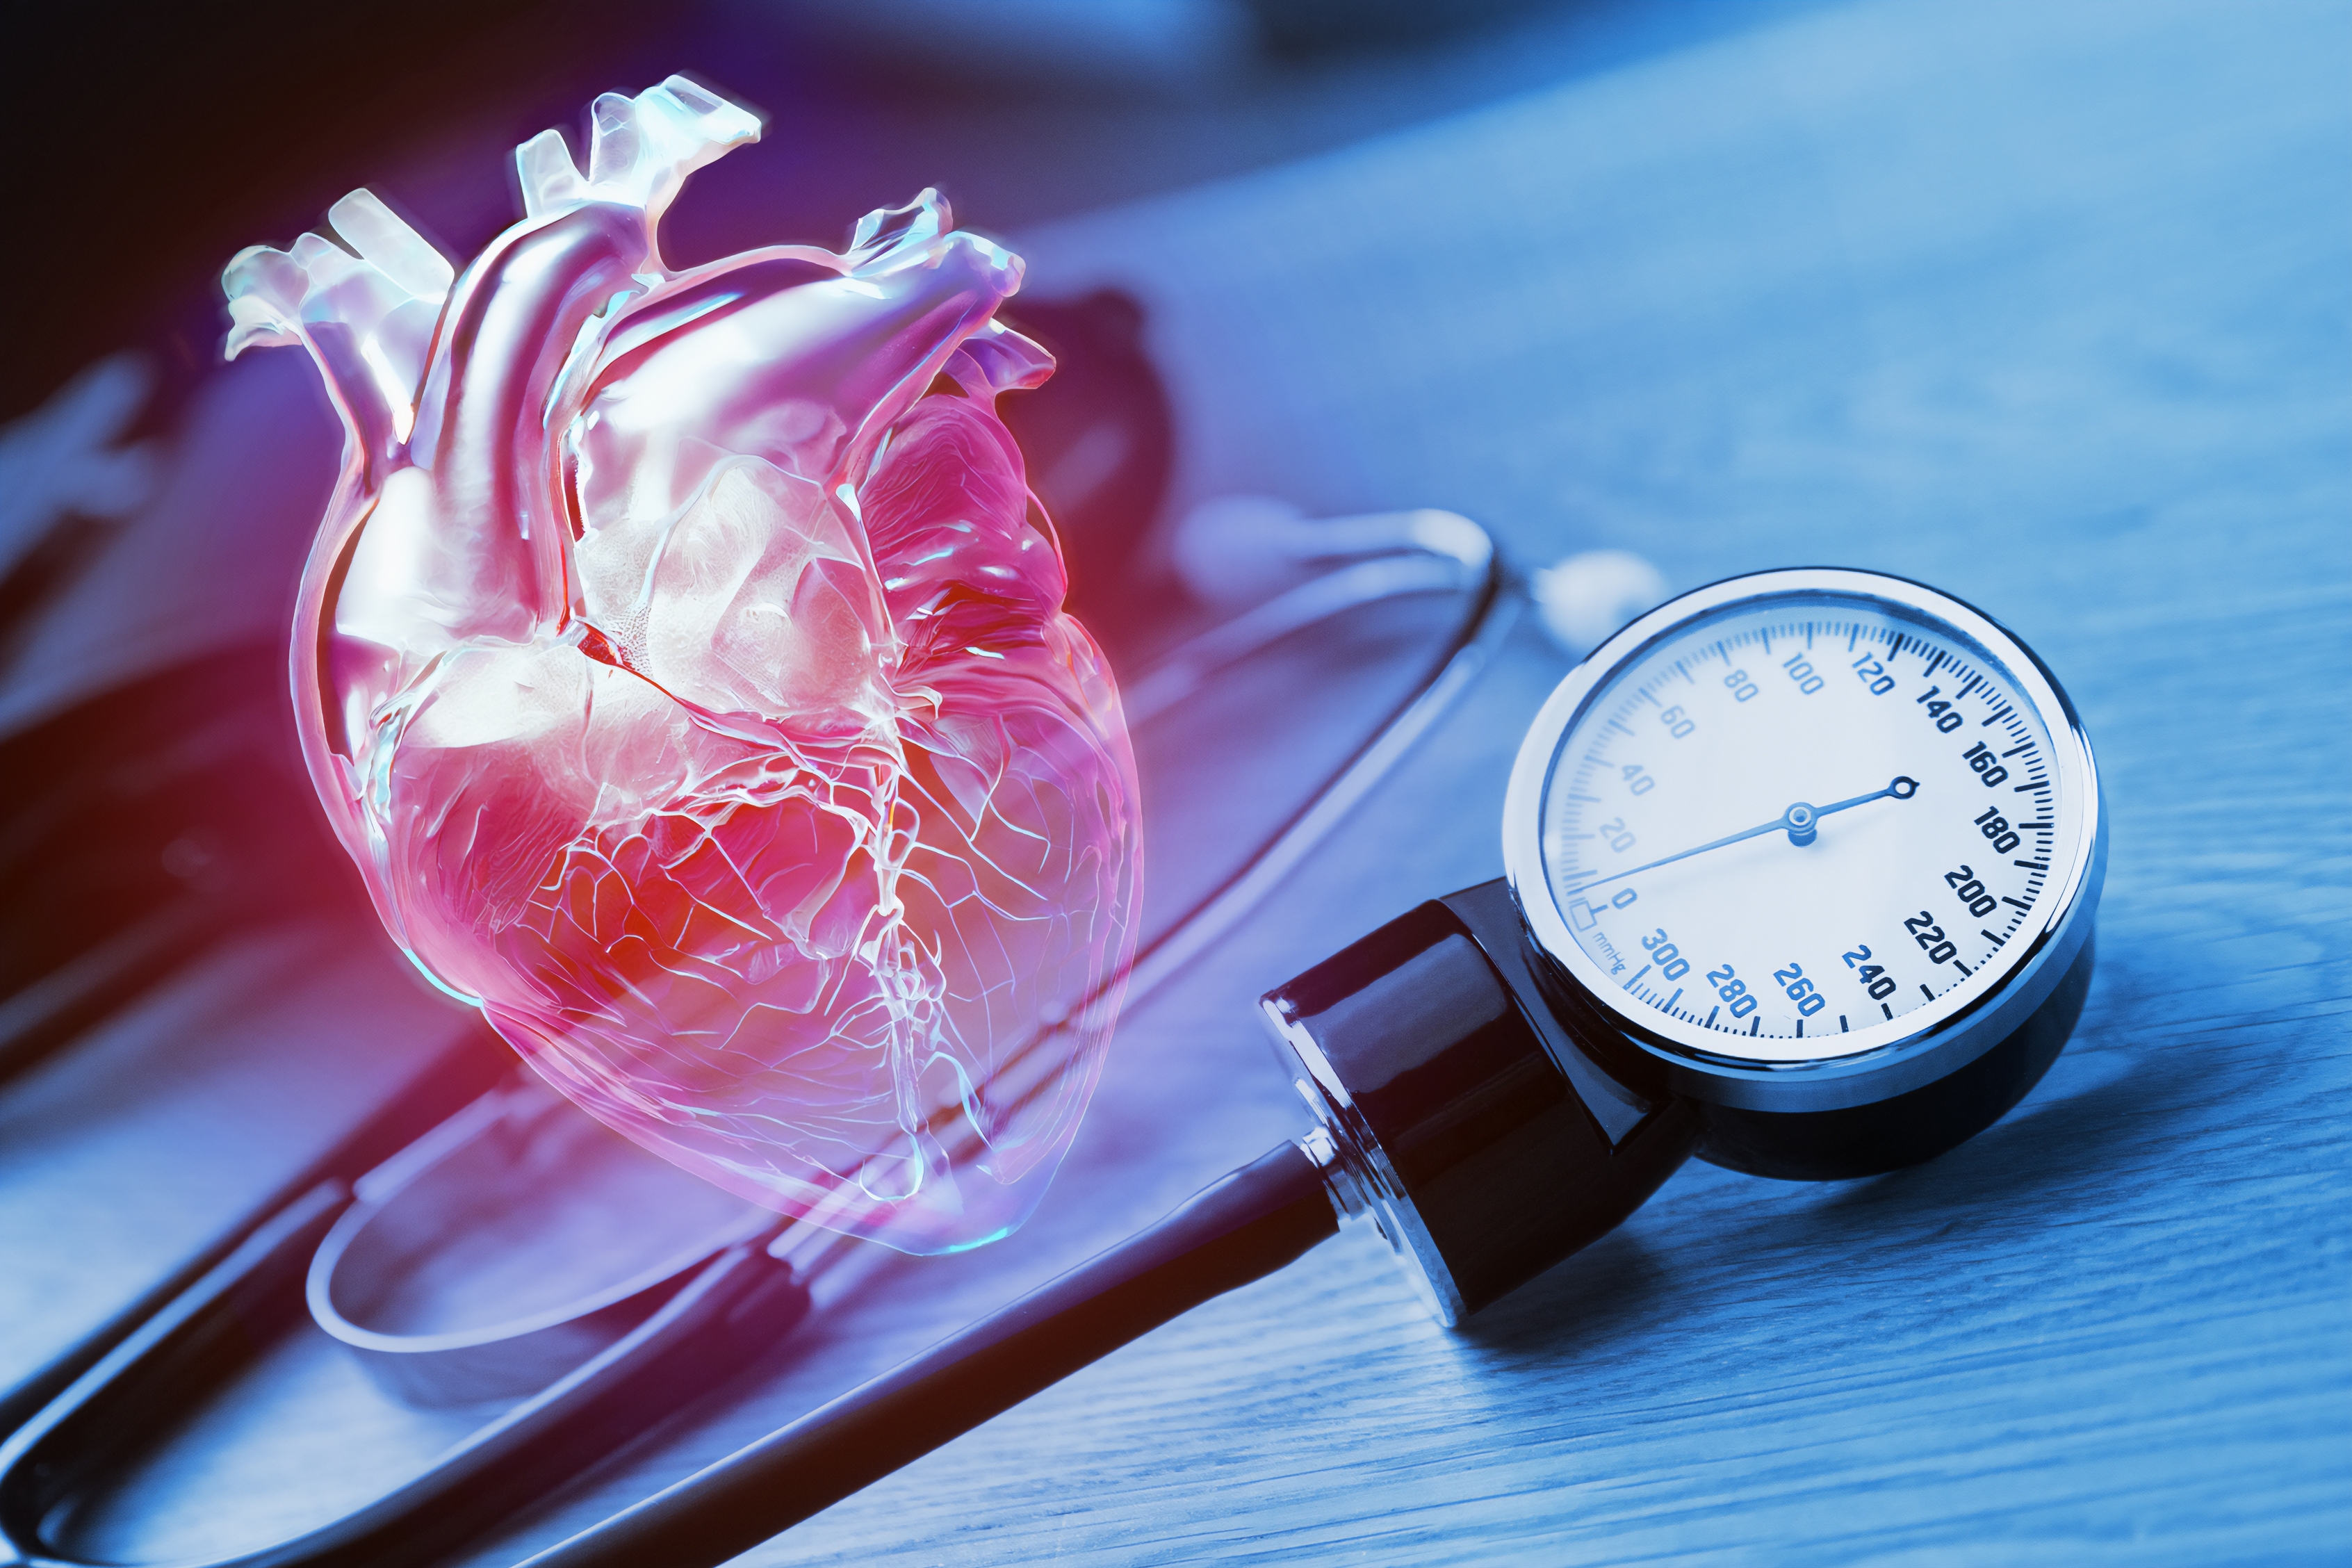 Can psychological illnesses increase heart disease risk?